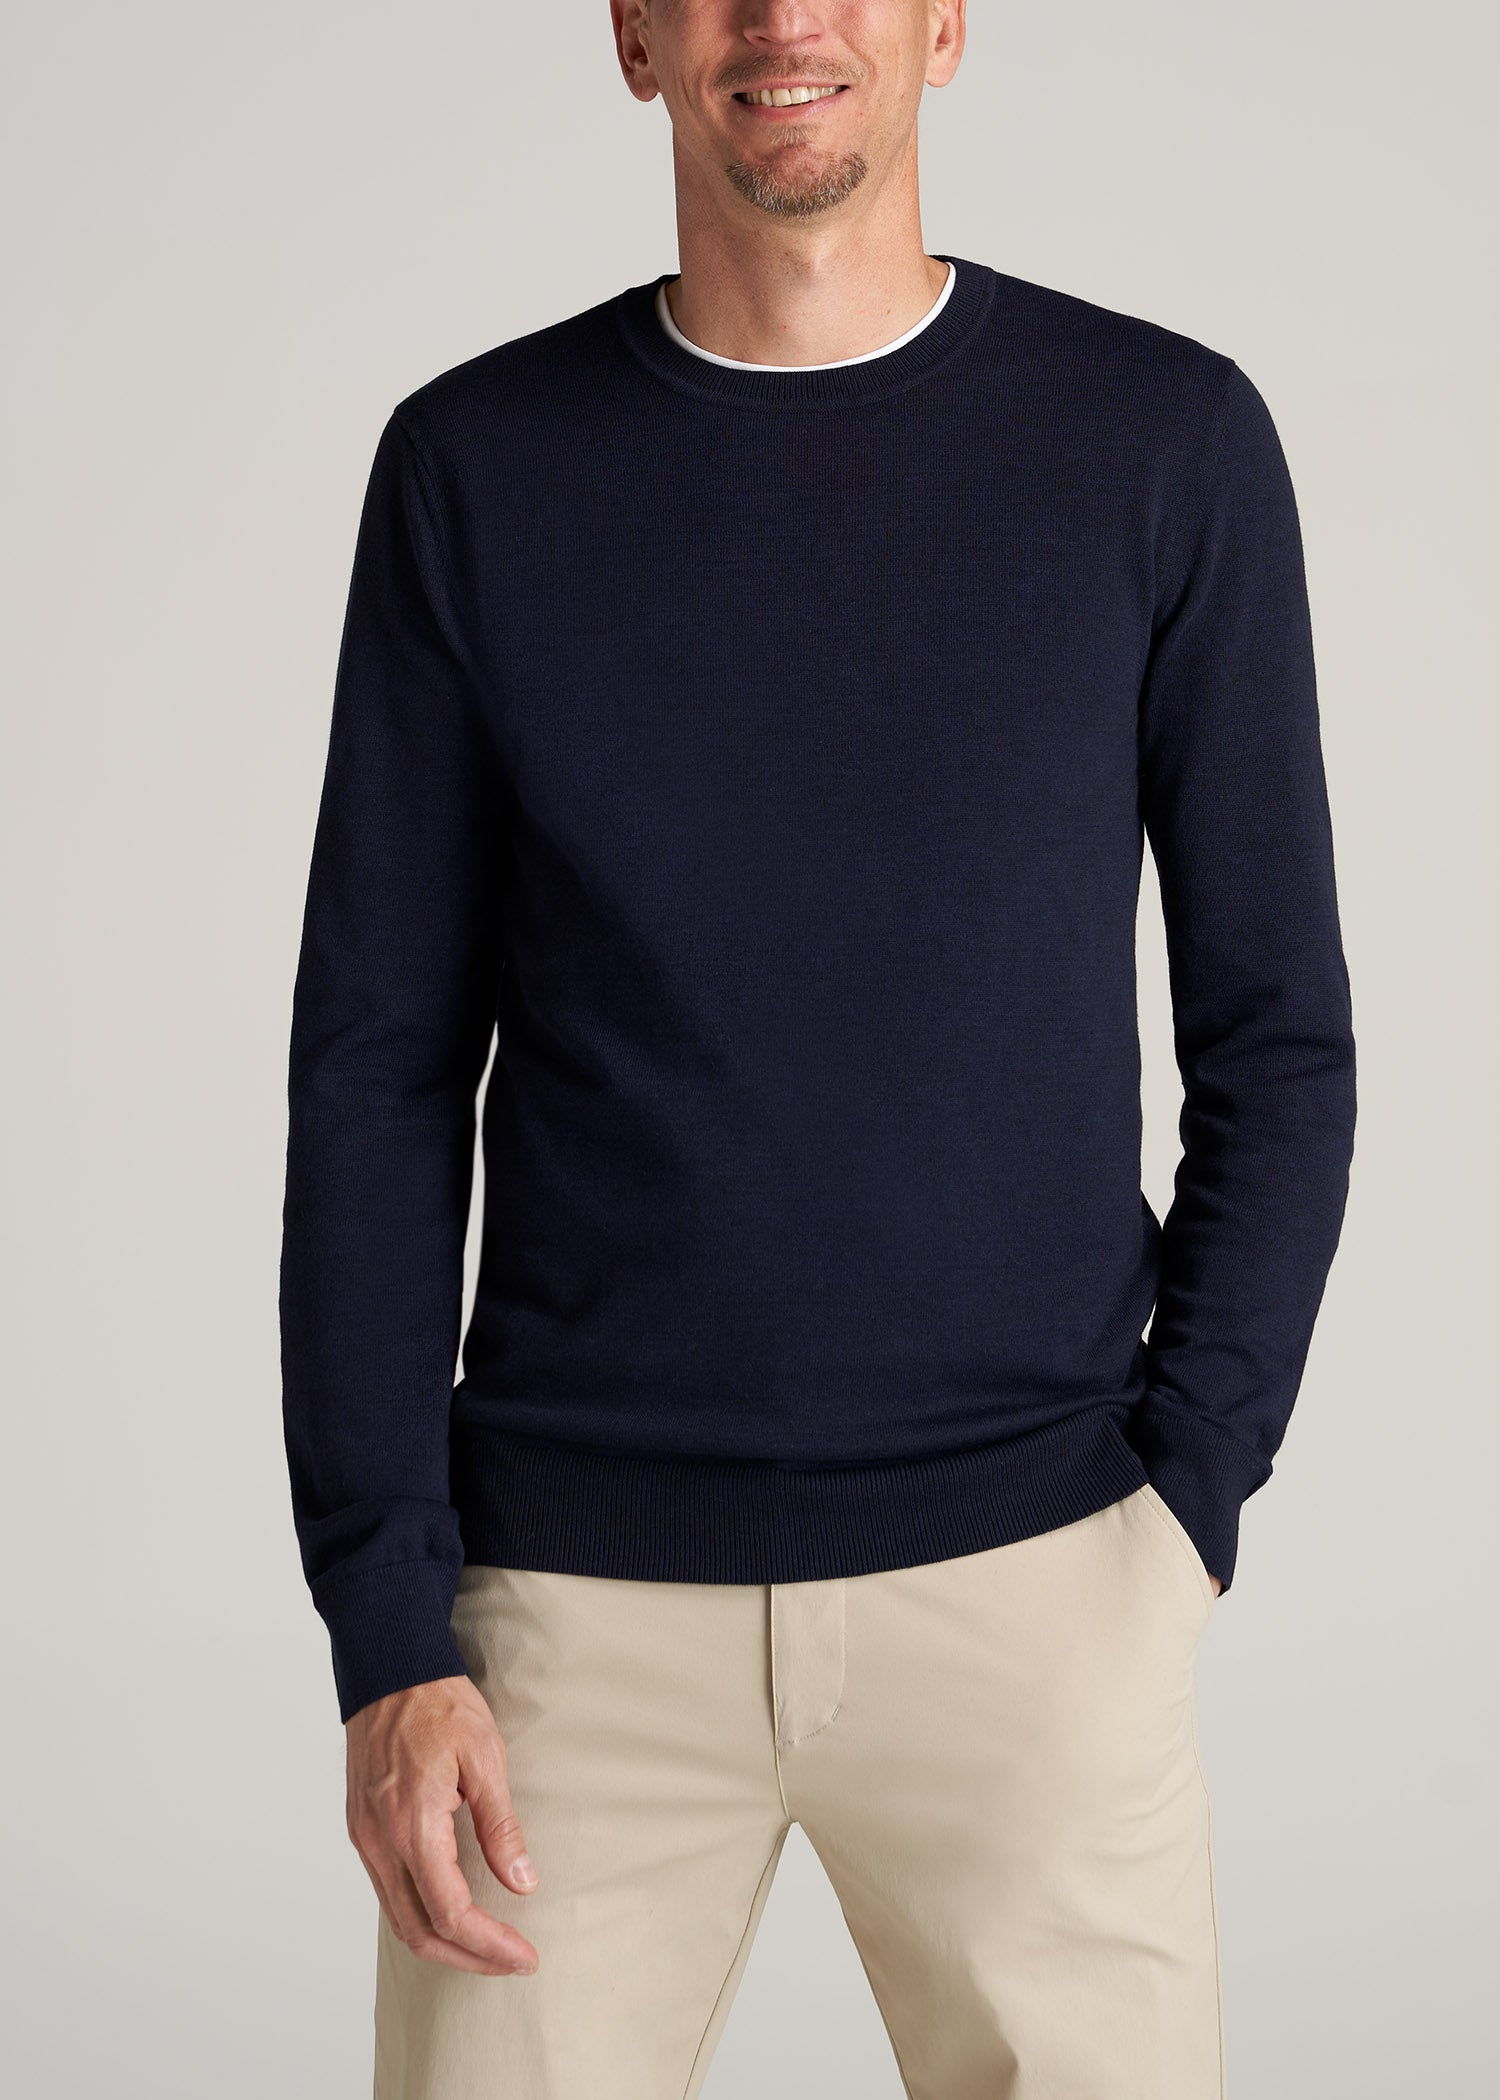 Everyday Crewneck Tall Men's Sweater in Patriot Blue